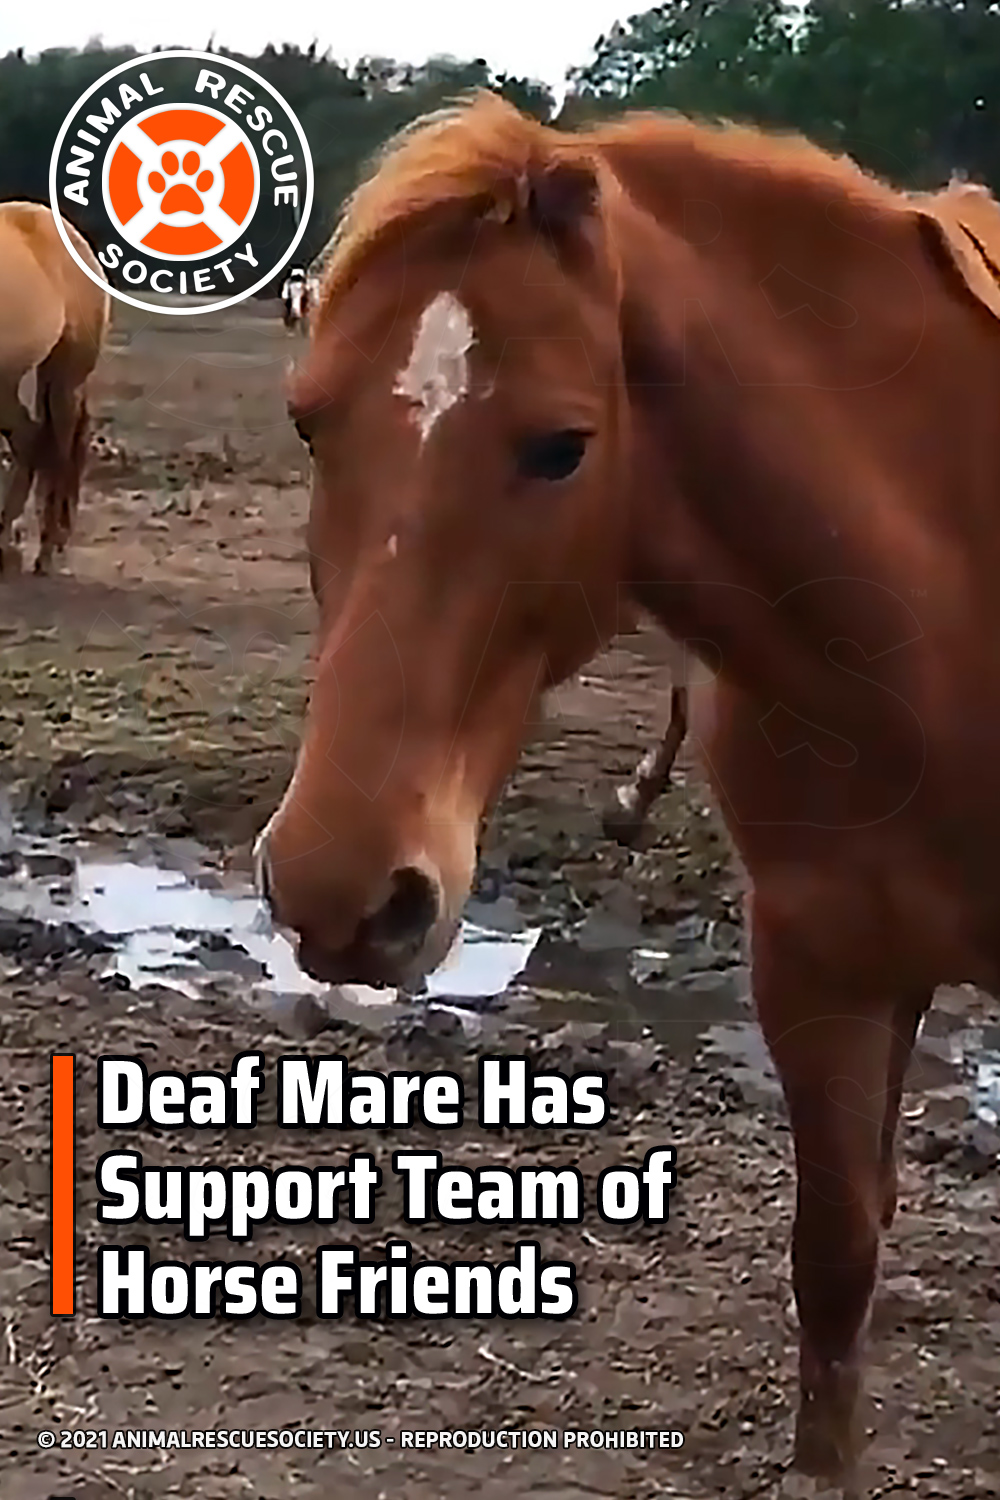 Deaf Mare Has Support Team of Horse Friends